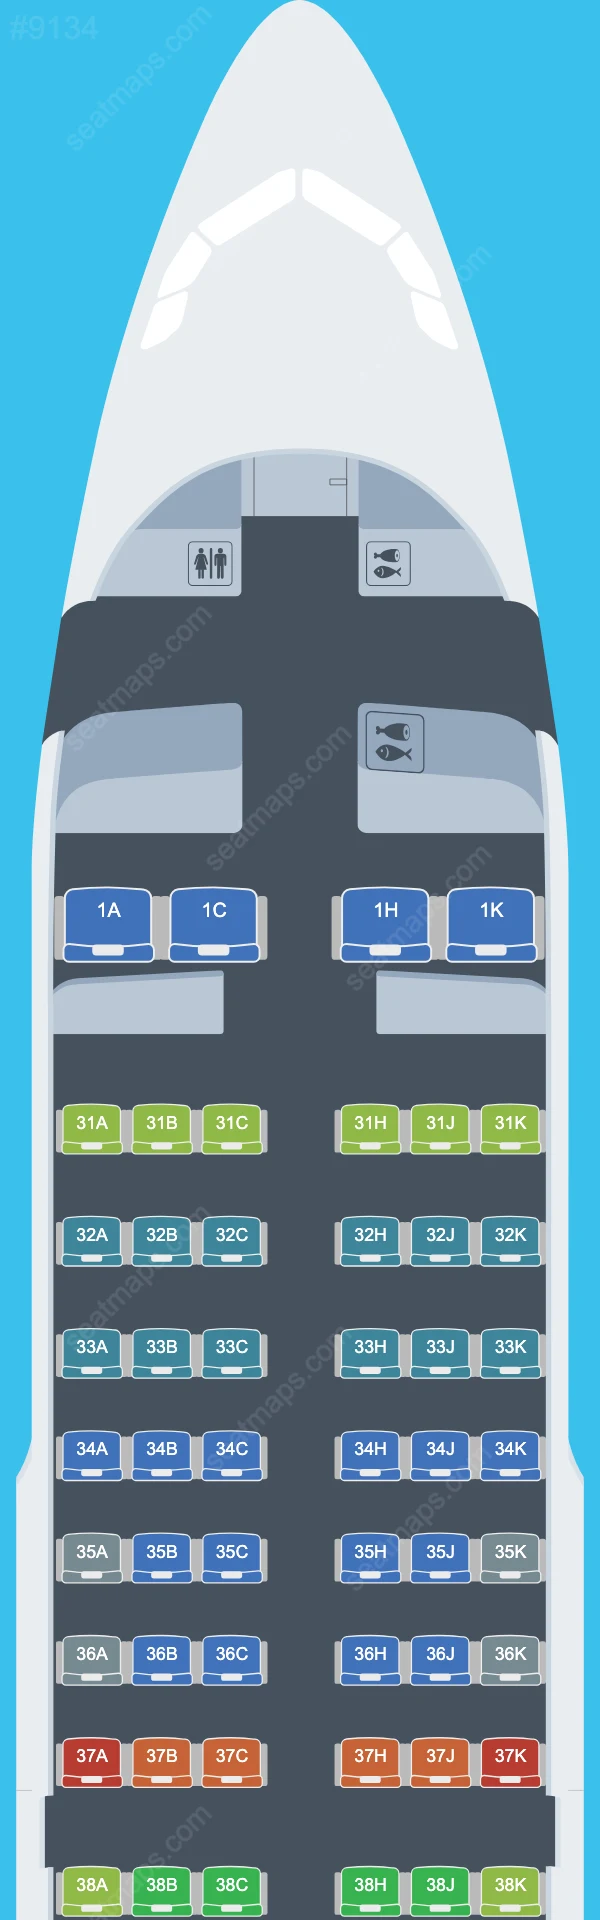 China Southern Airbus A319 Seat Maps A319-100 V.1